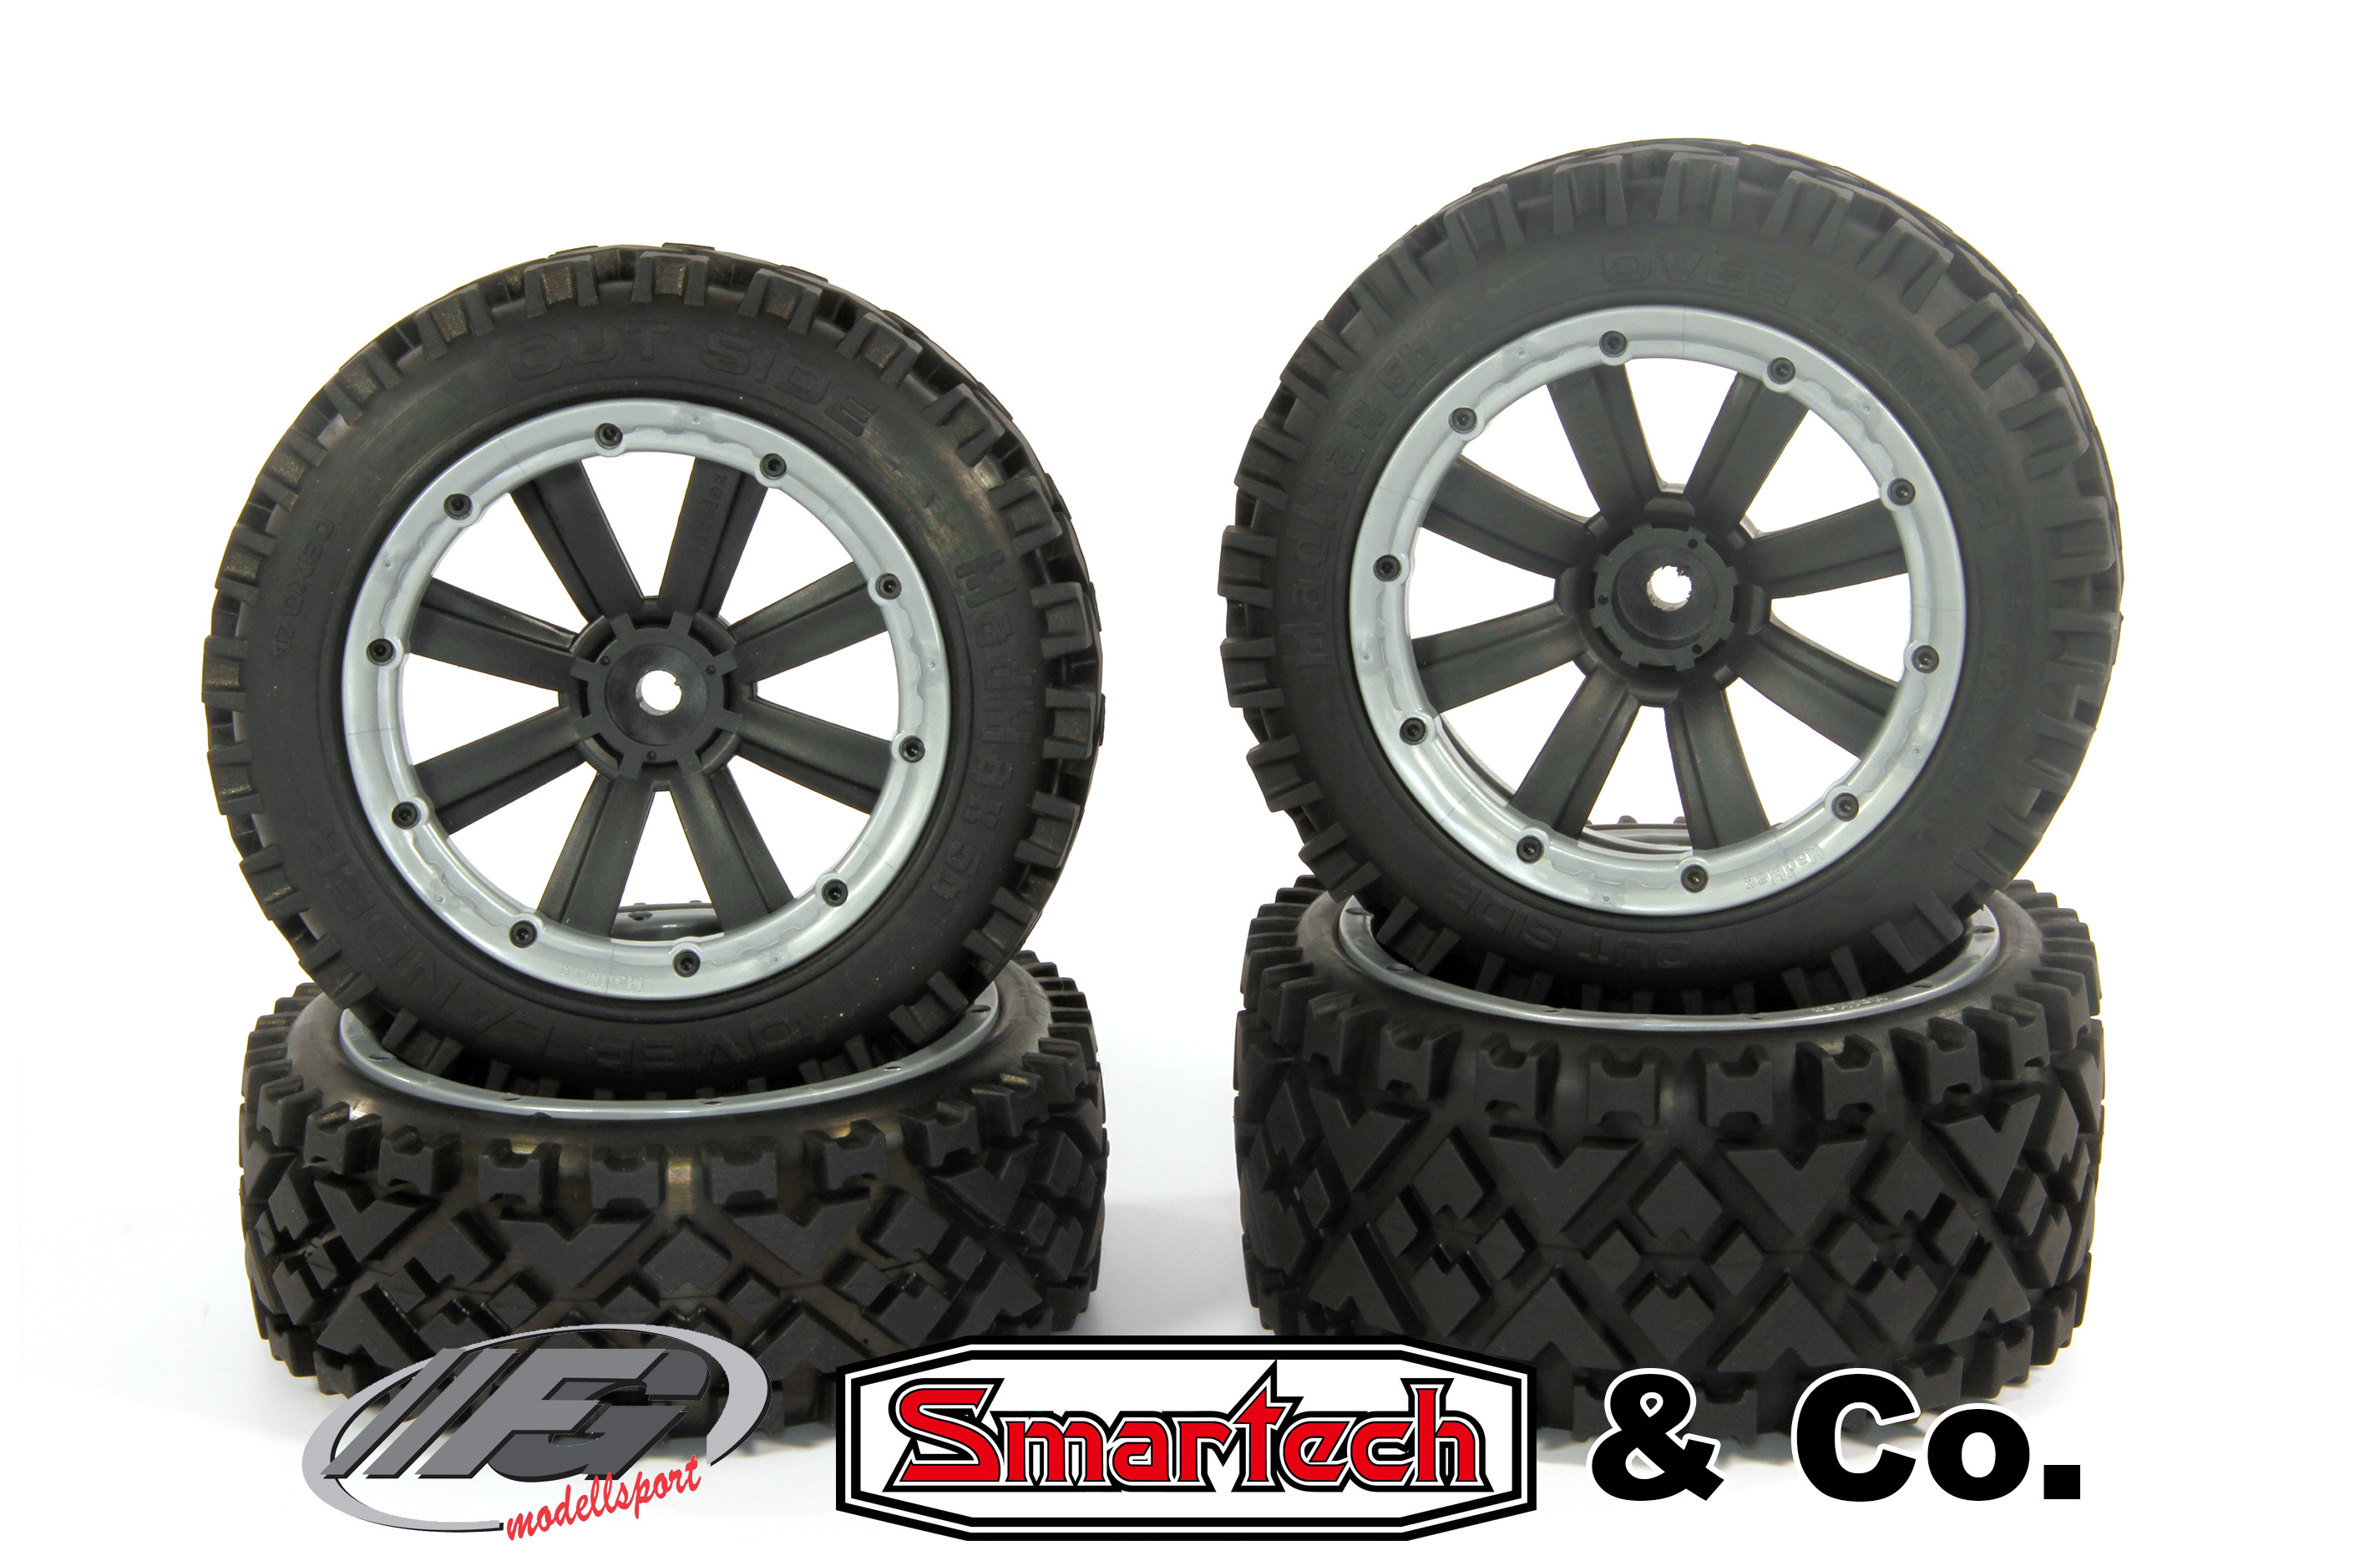 y1403/01 MadMax OVER LANDER 170x80/x60 tires for FG/Smartech and other (18 mm square drive) Offer